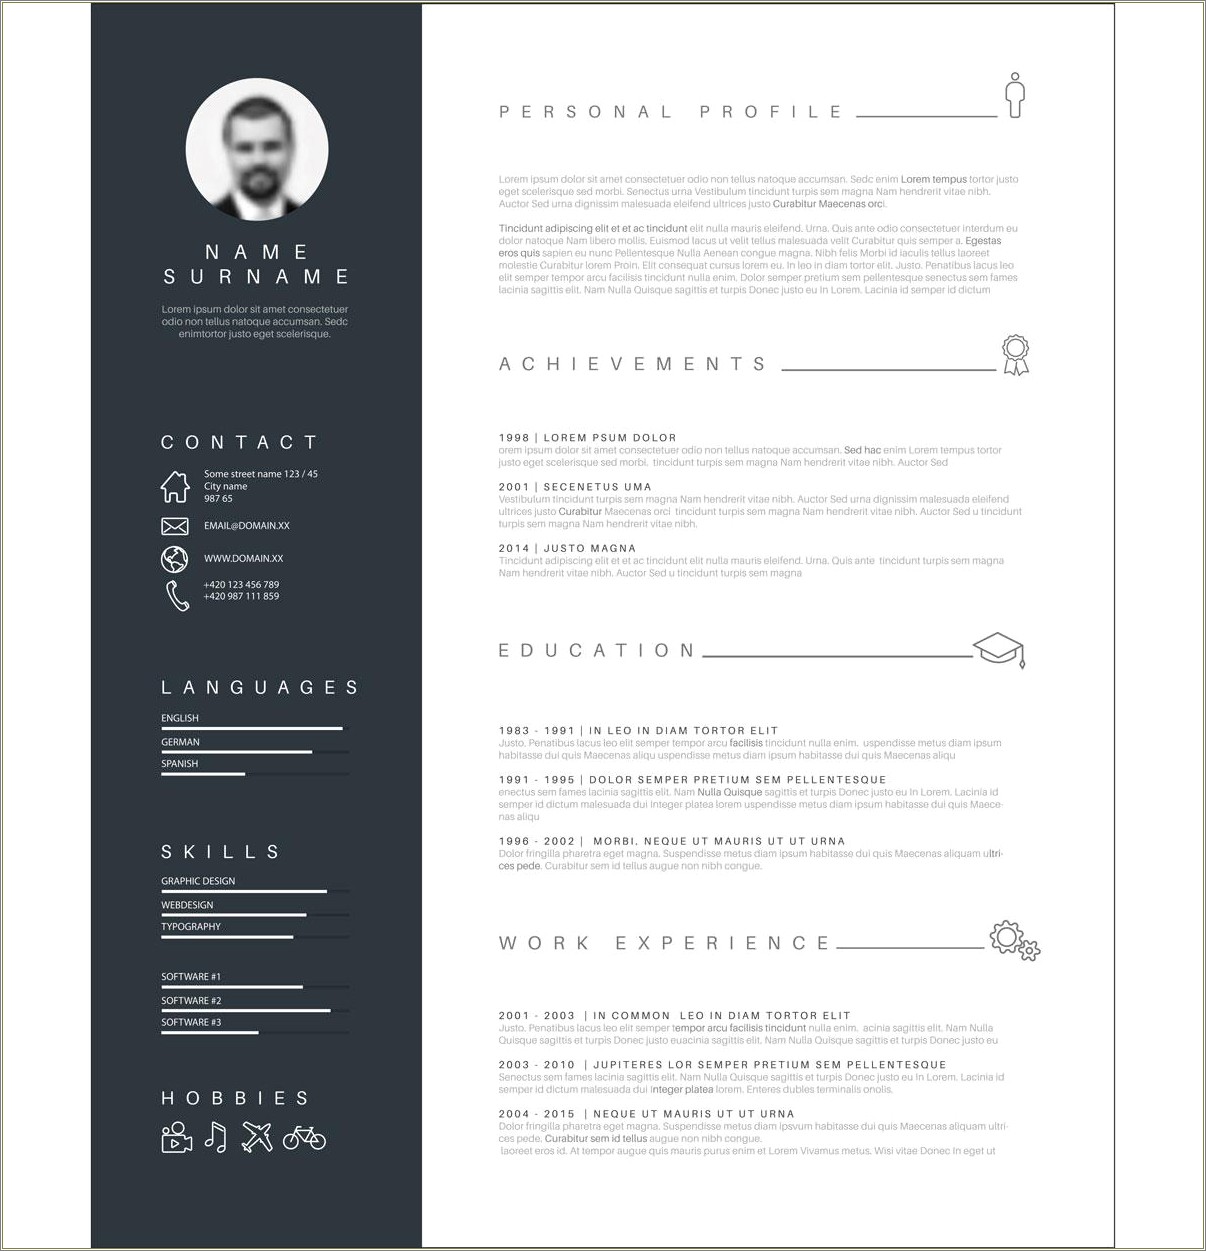 Resume Examples 2015 For College Students